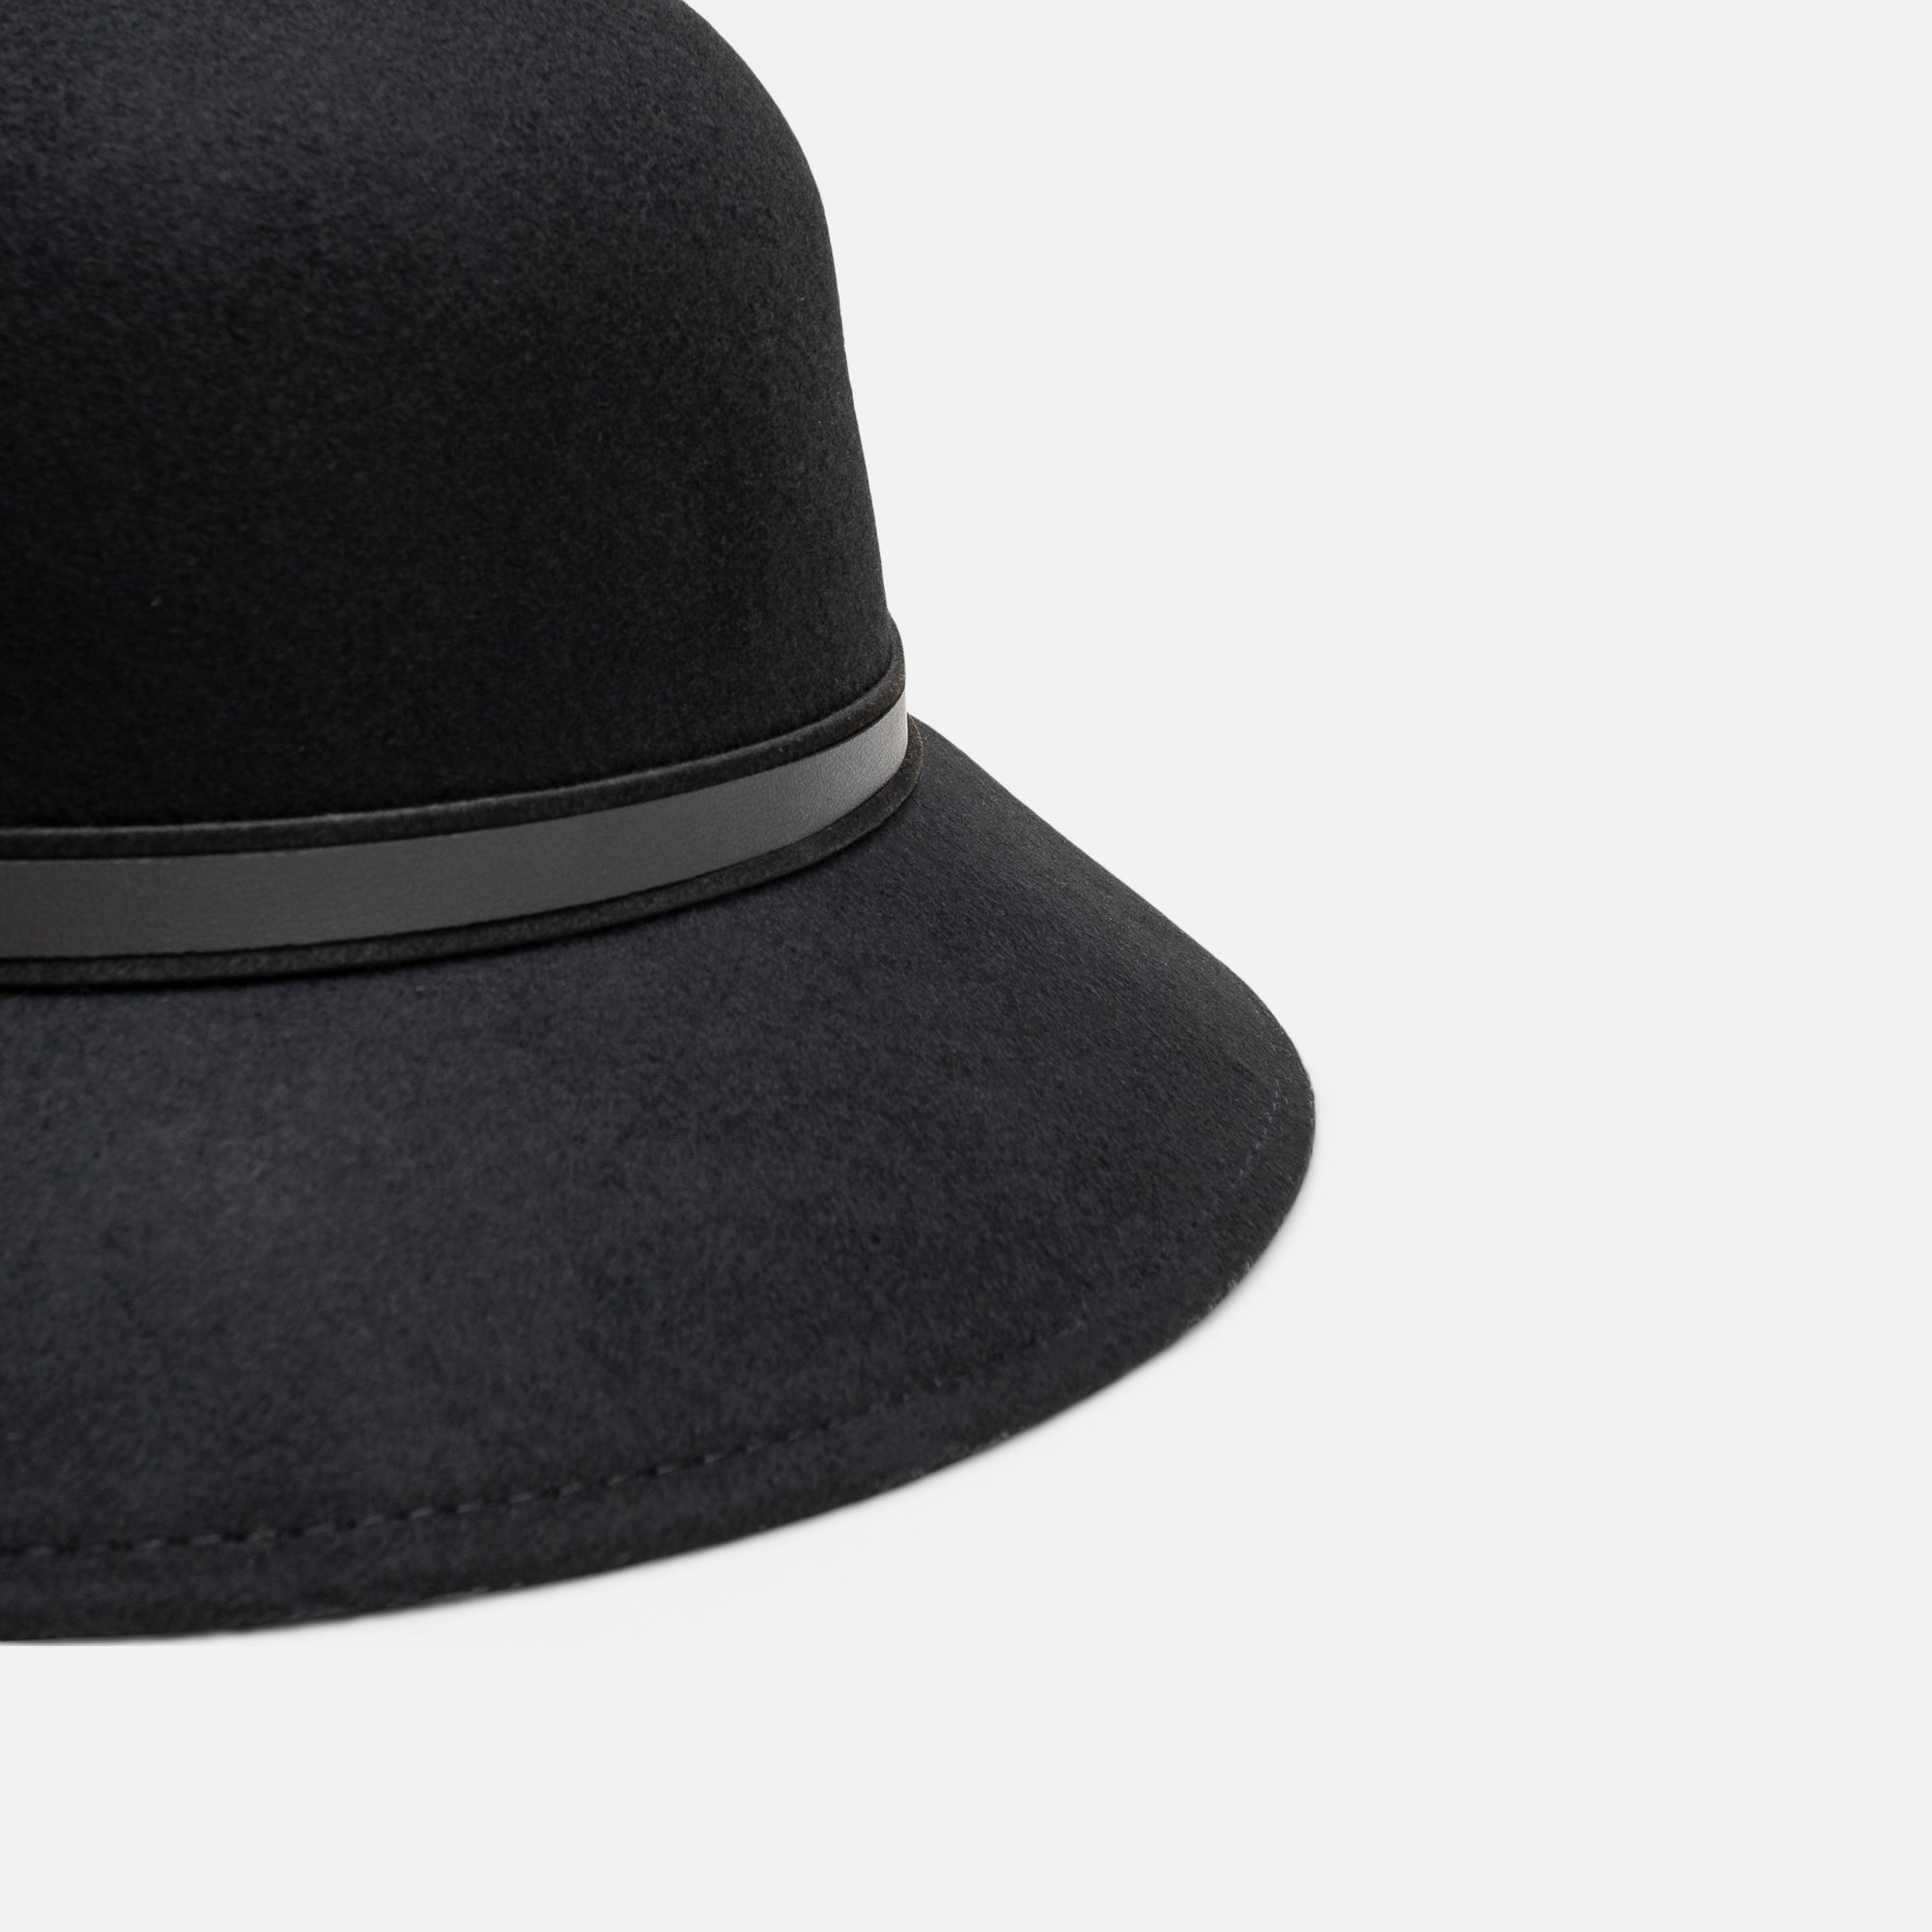 Black cloche hat with black leather band